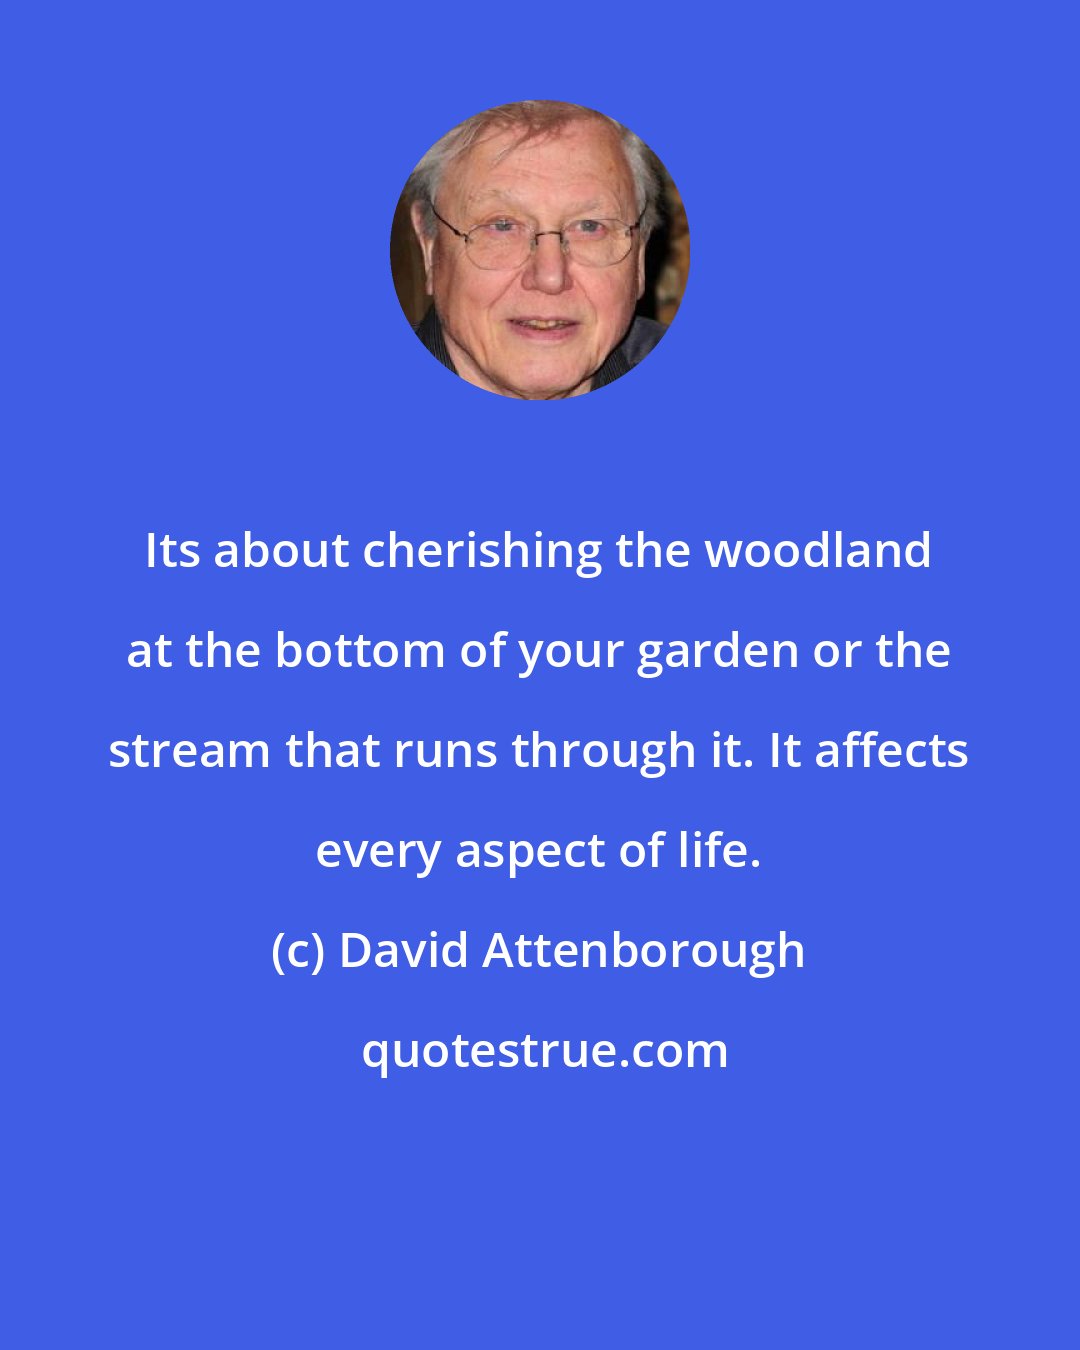 David Attenborough: Its about cherishing the woodland at the bottom of your garden or the stream that runs through it. It affects every aspect of life.